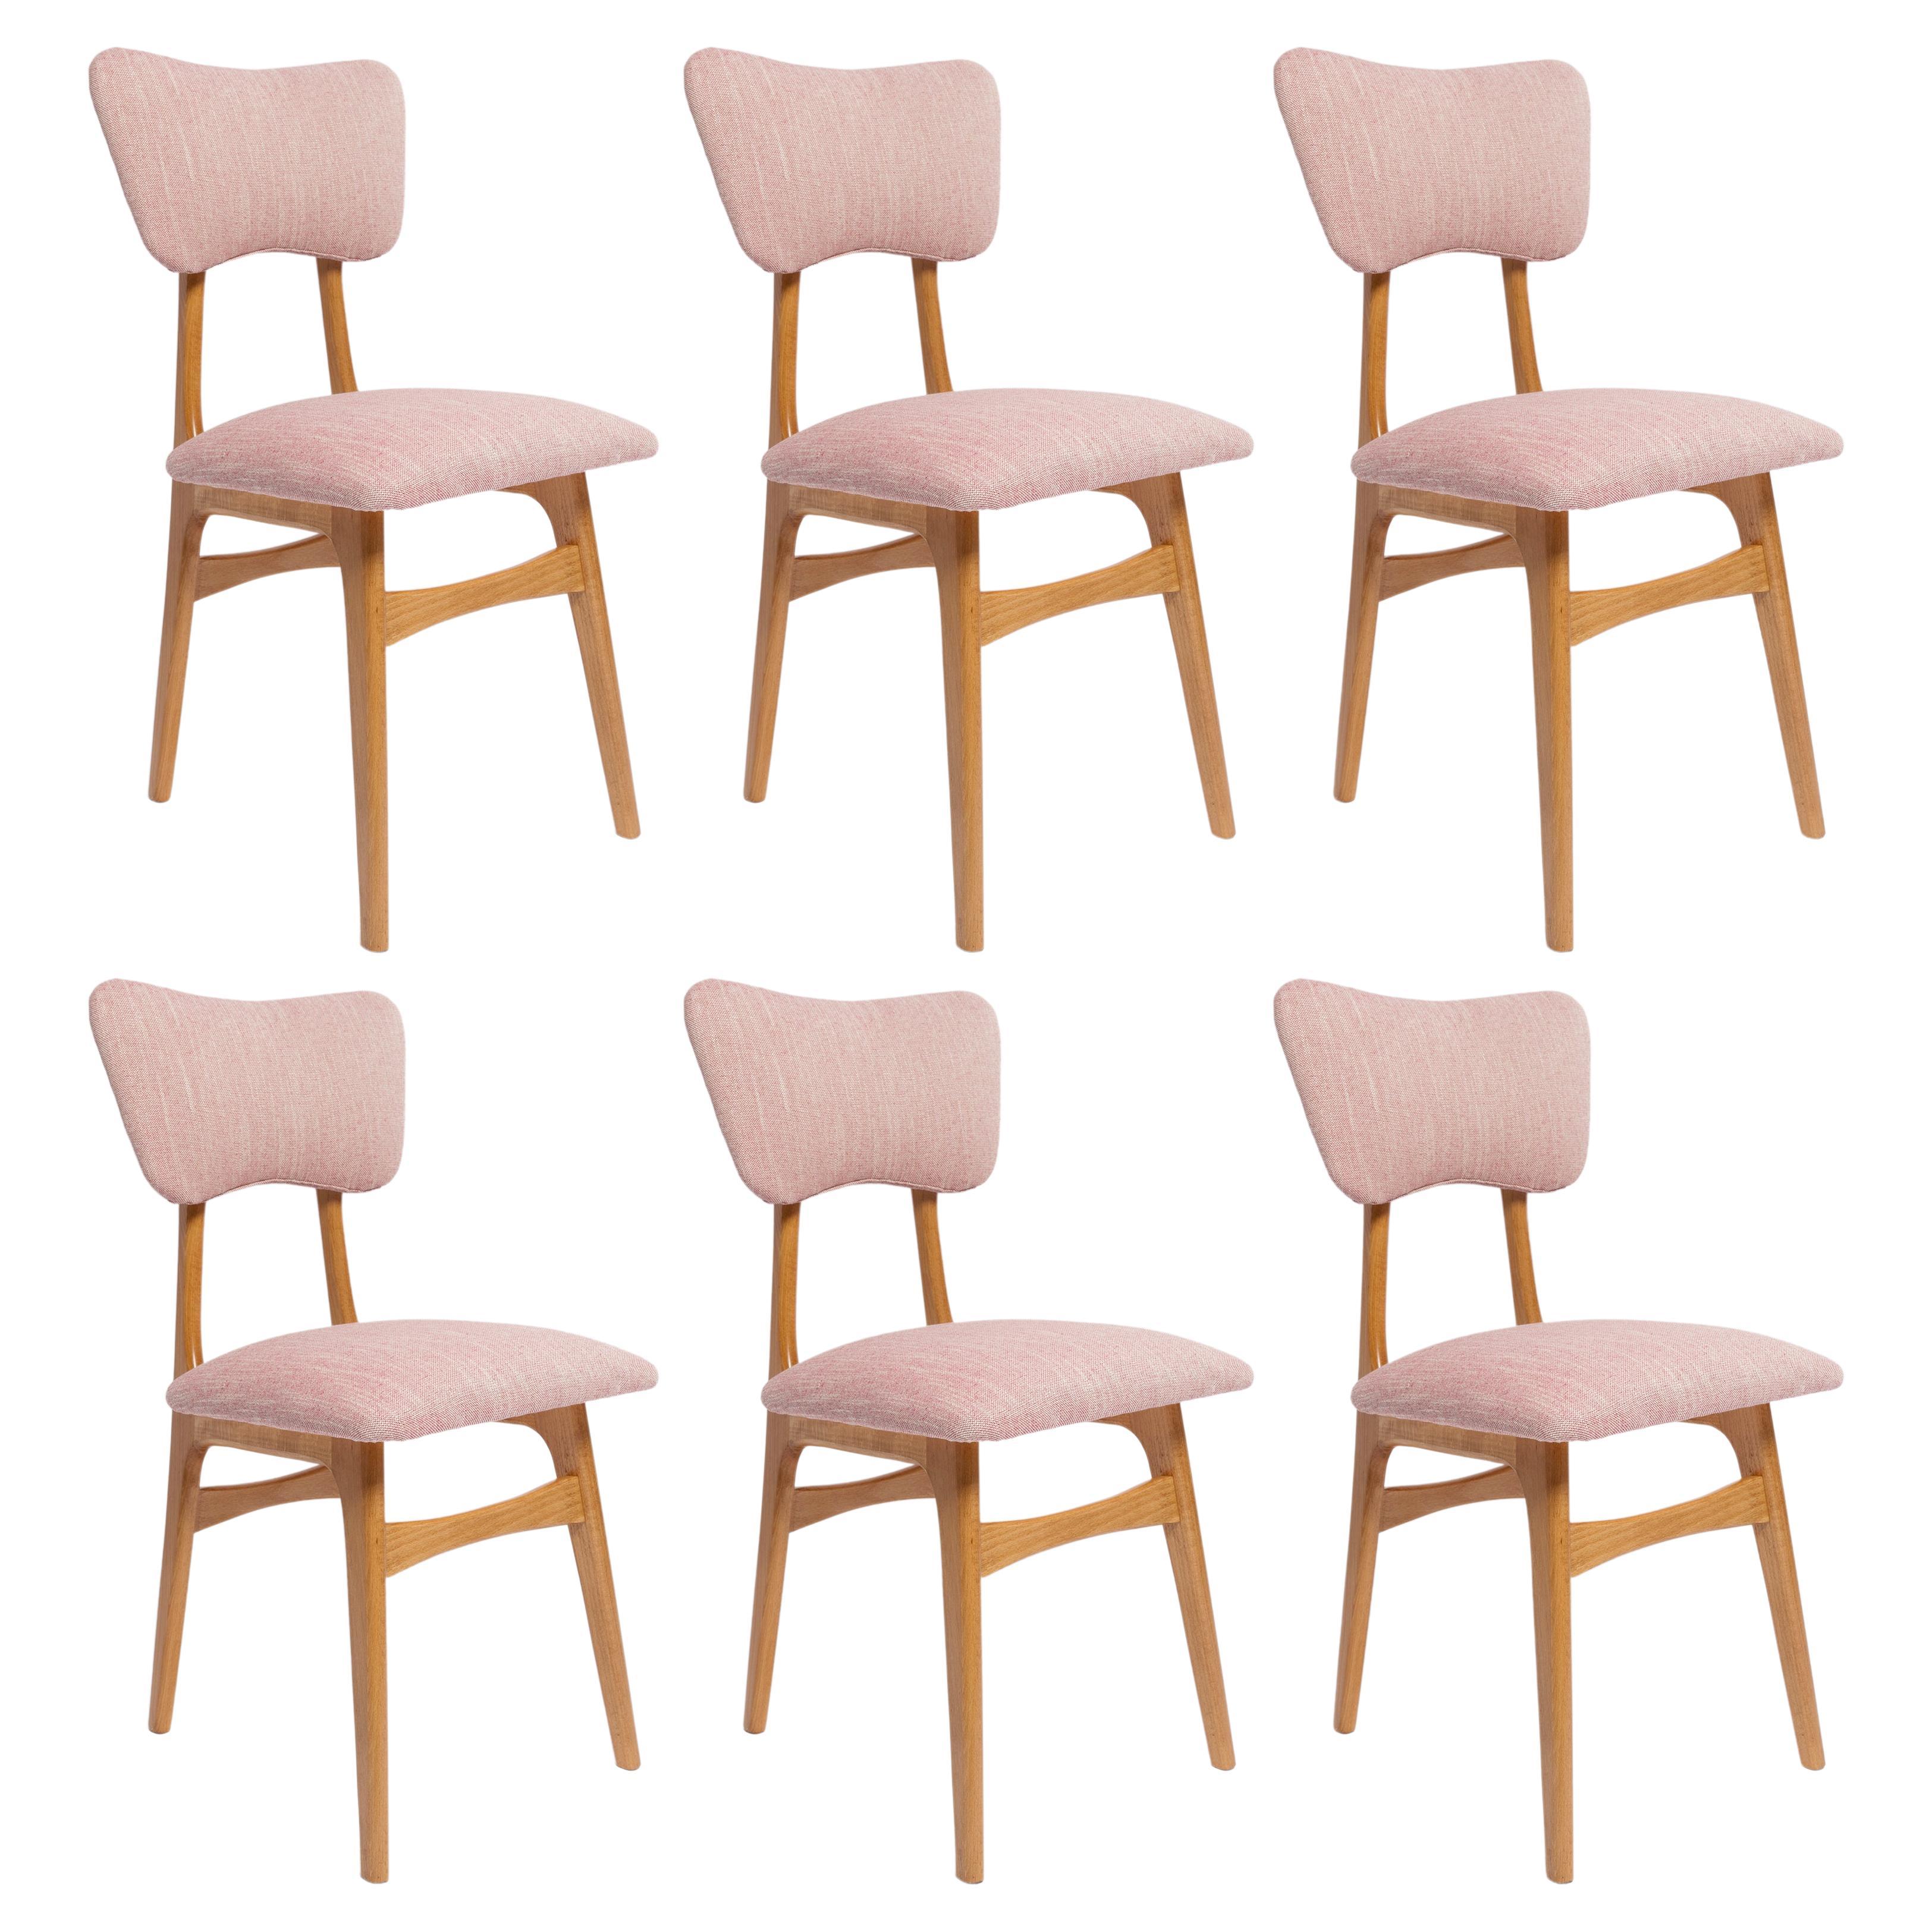 Six Mid-Century Butterfly Dining Chairs, Pink Linen, Light Wood, Europe, 1960s For Sale